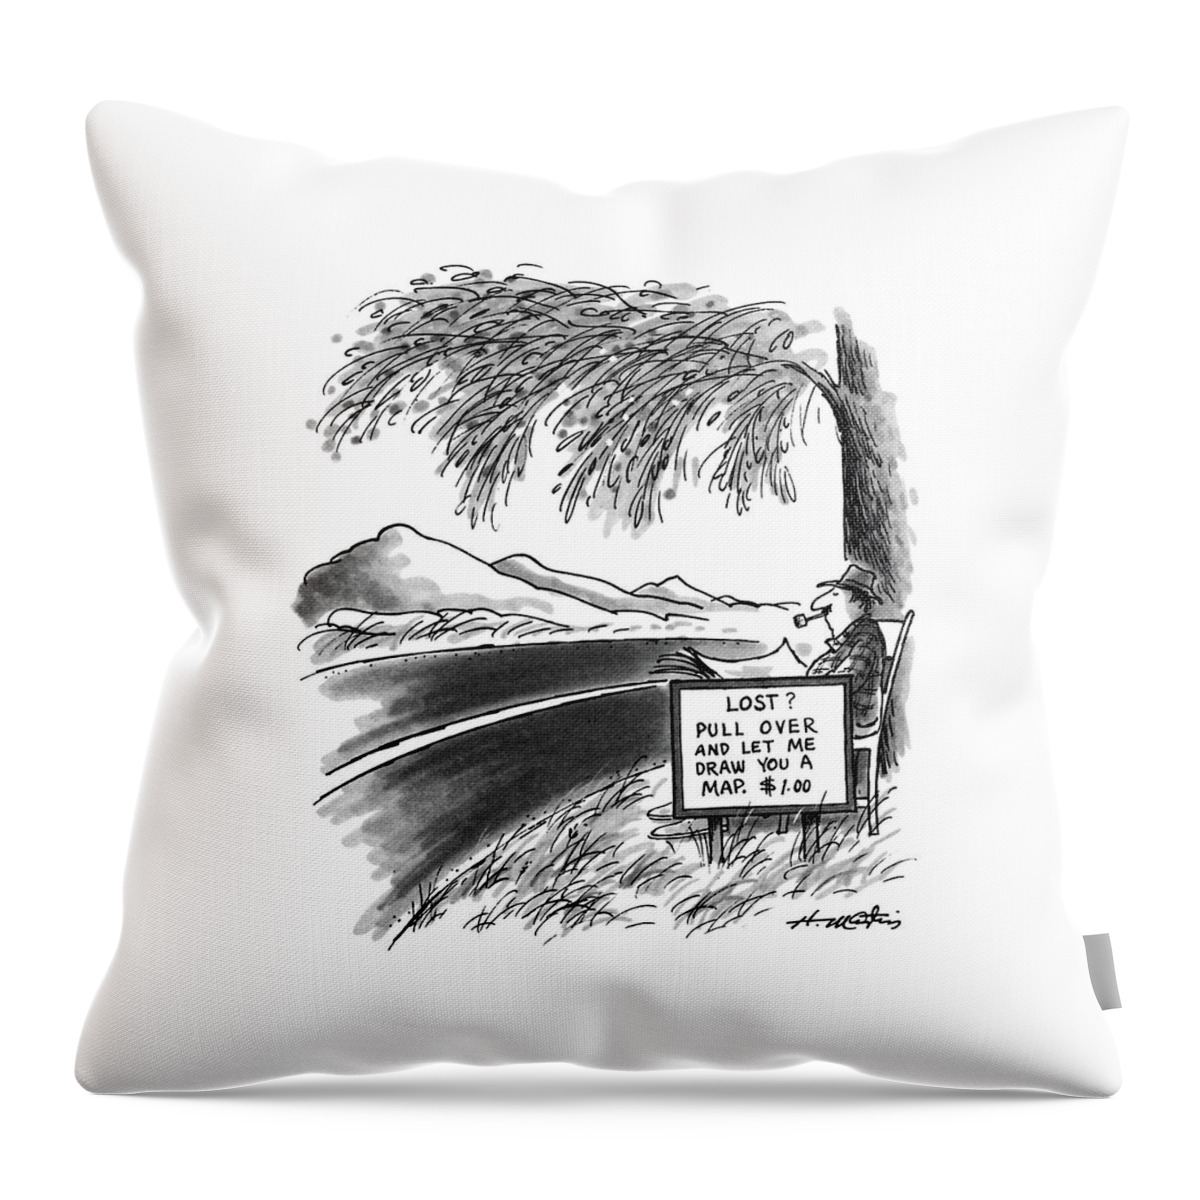 New Yorker April 6th, 1987 Throw Pillow